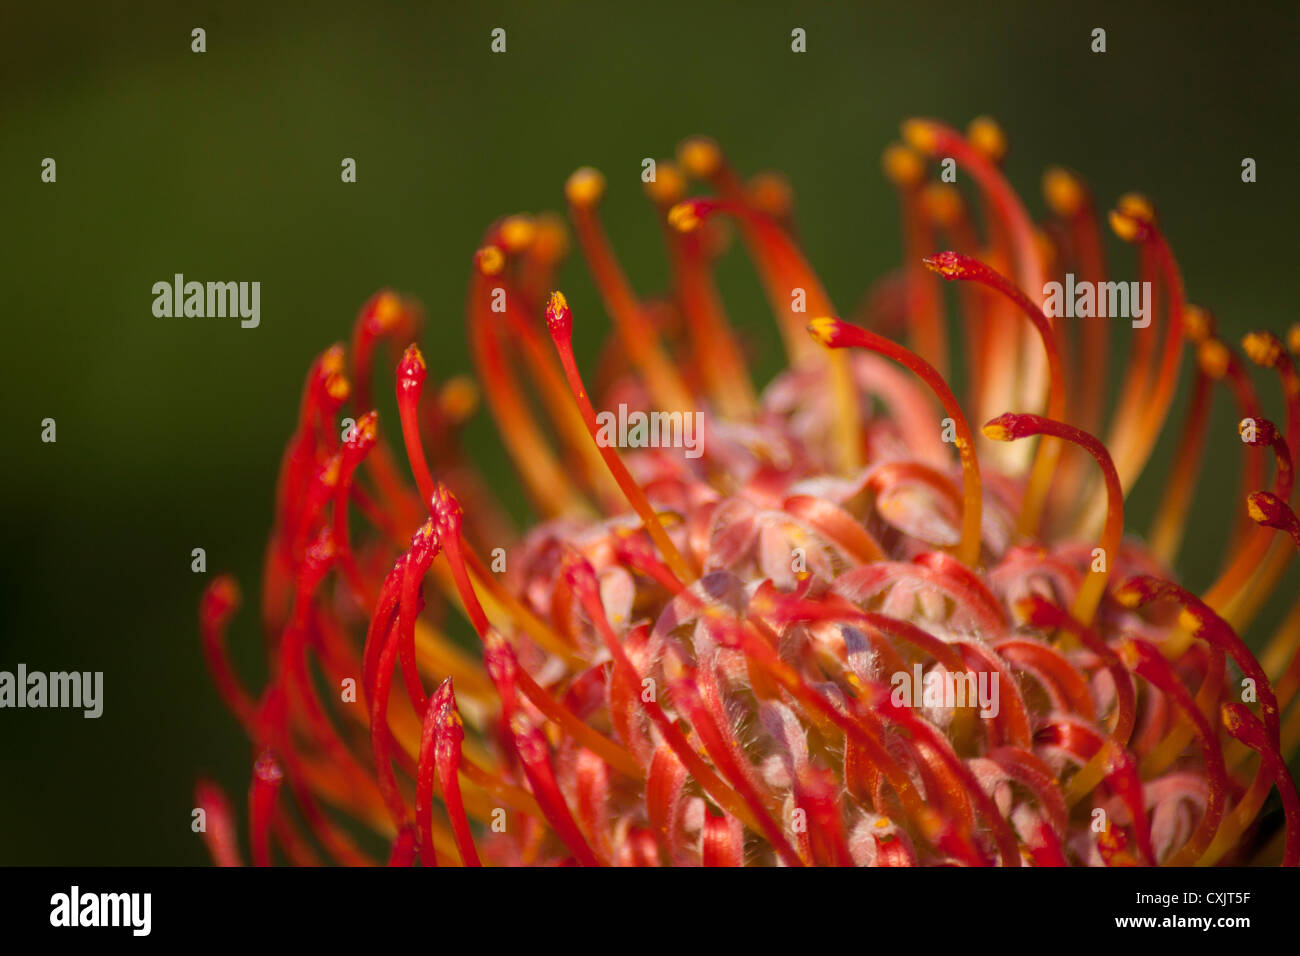 Red protea flowers in bloom leucospermum rigoletto African indigenous plant against a green background Stock Photo